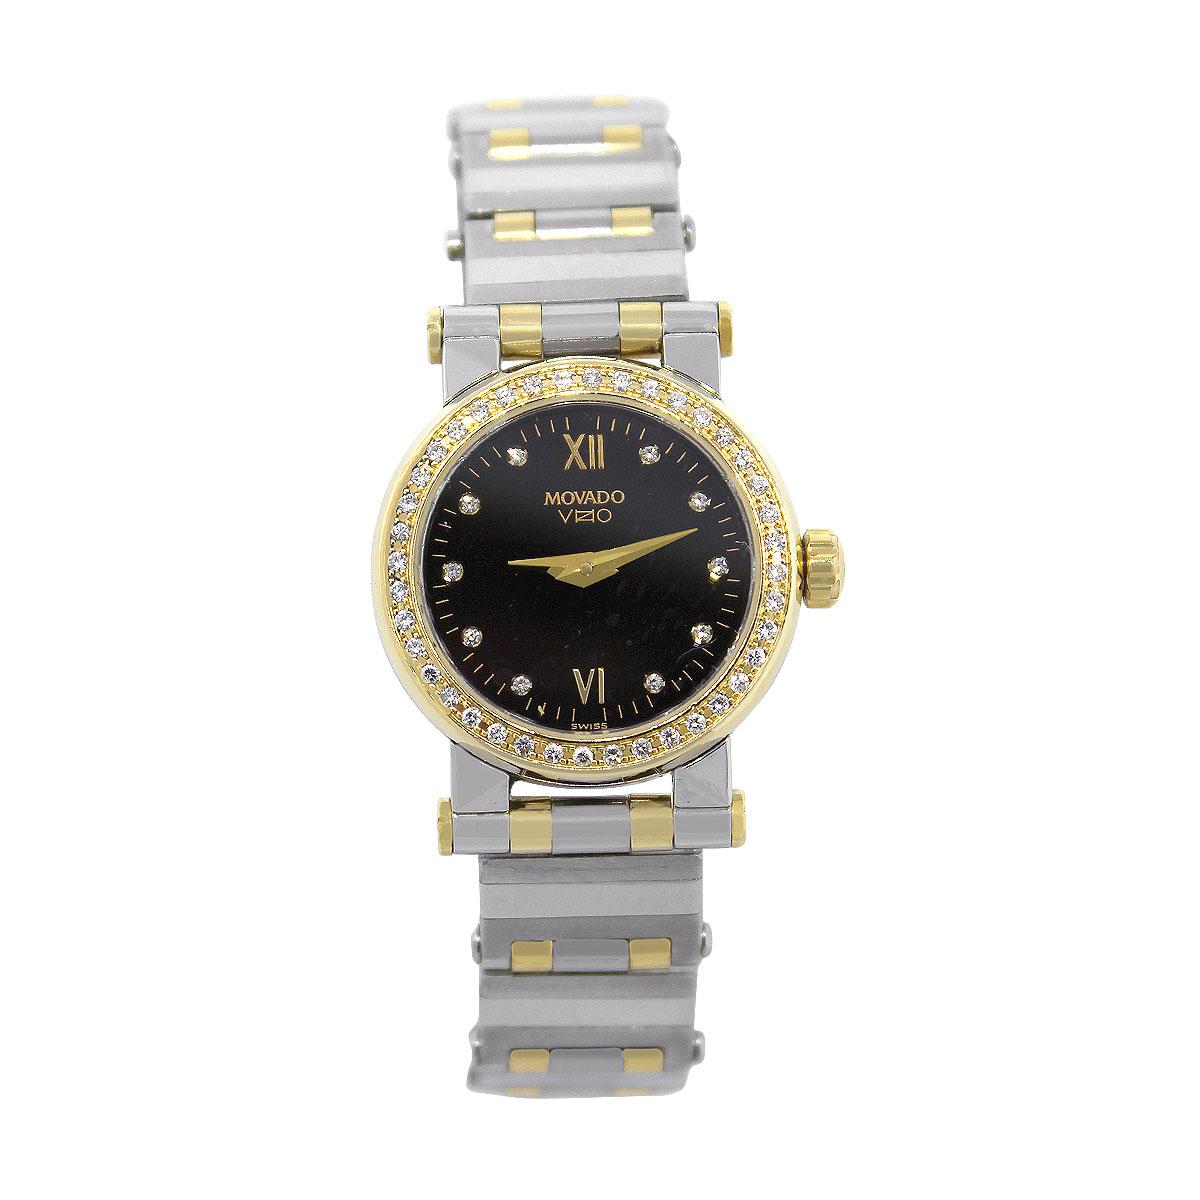 Brand: Movado
MPN: 3310871
Model: Vizio
Case Material: Stainless Steel
Case Diameter: 24mm
Crystal: scratch resistant sapphire
Bezel: yellow gold channel set diamond bezel
Dial: Black dial with yellow hold roman numerals, hands and diamond